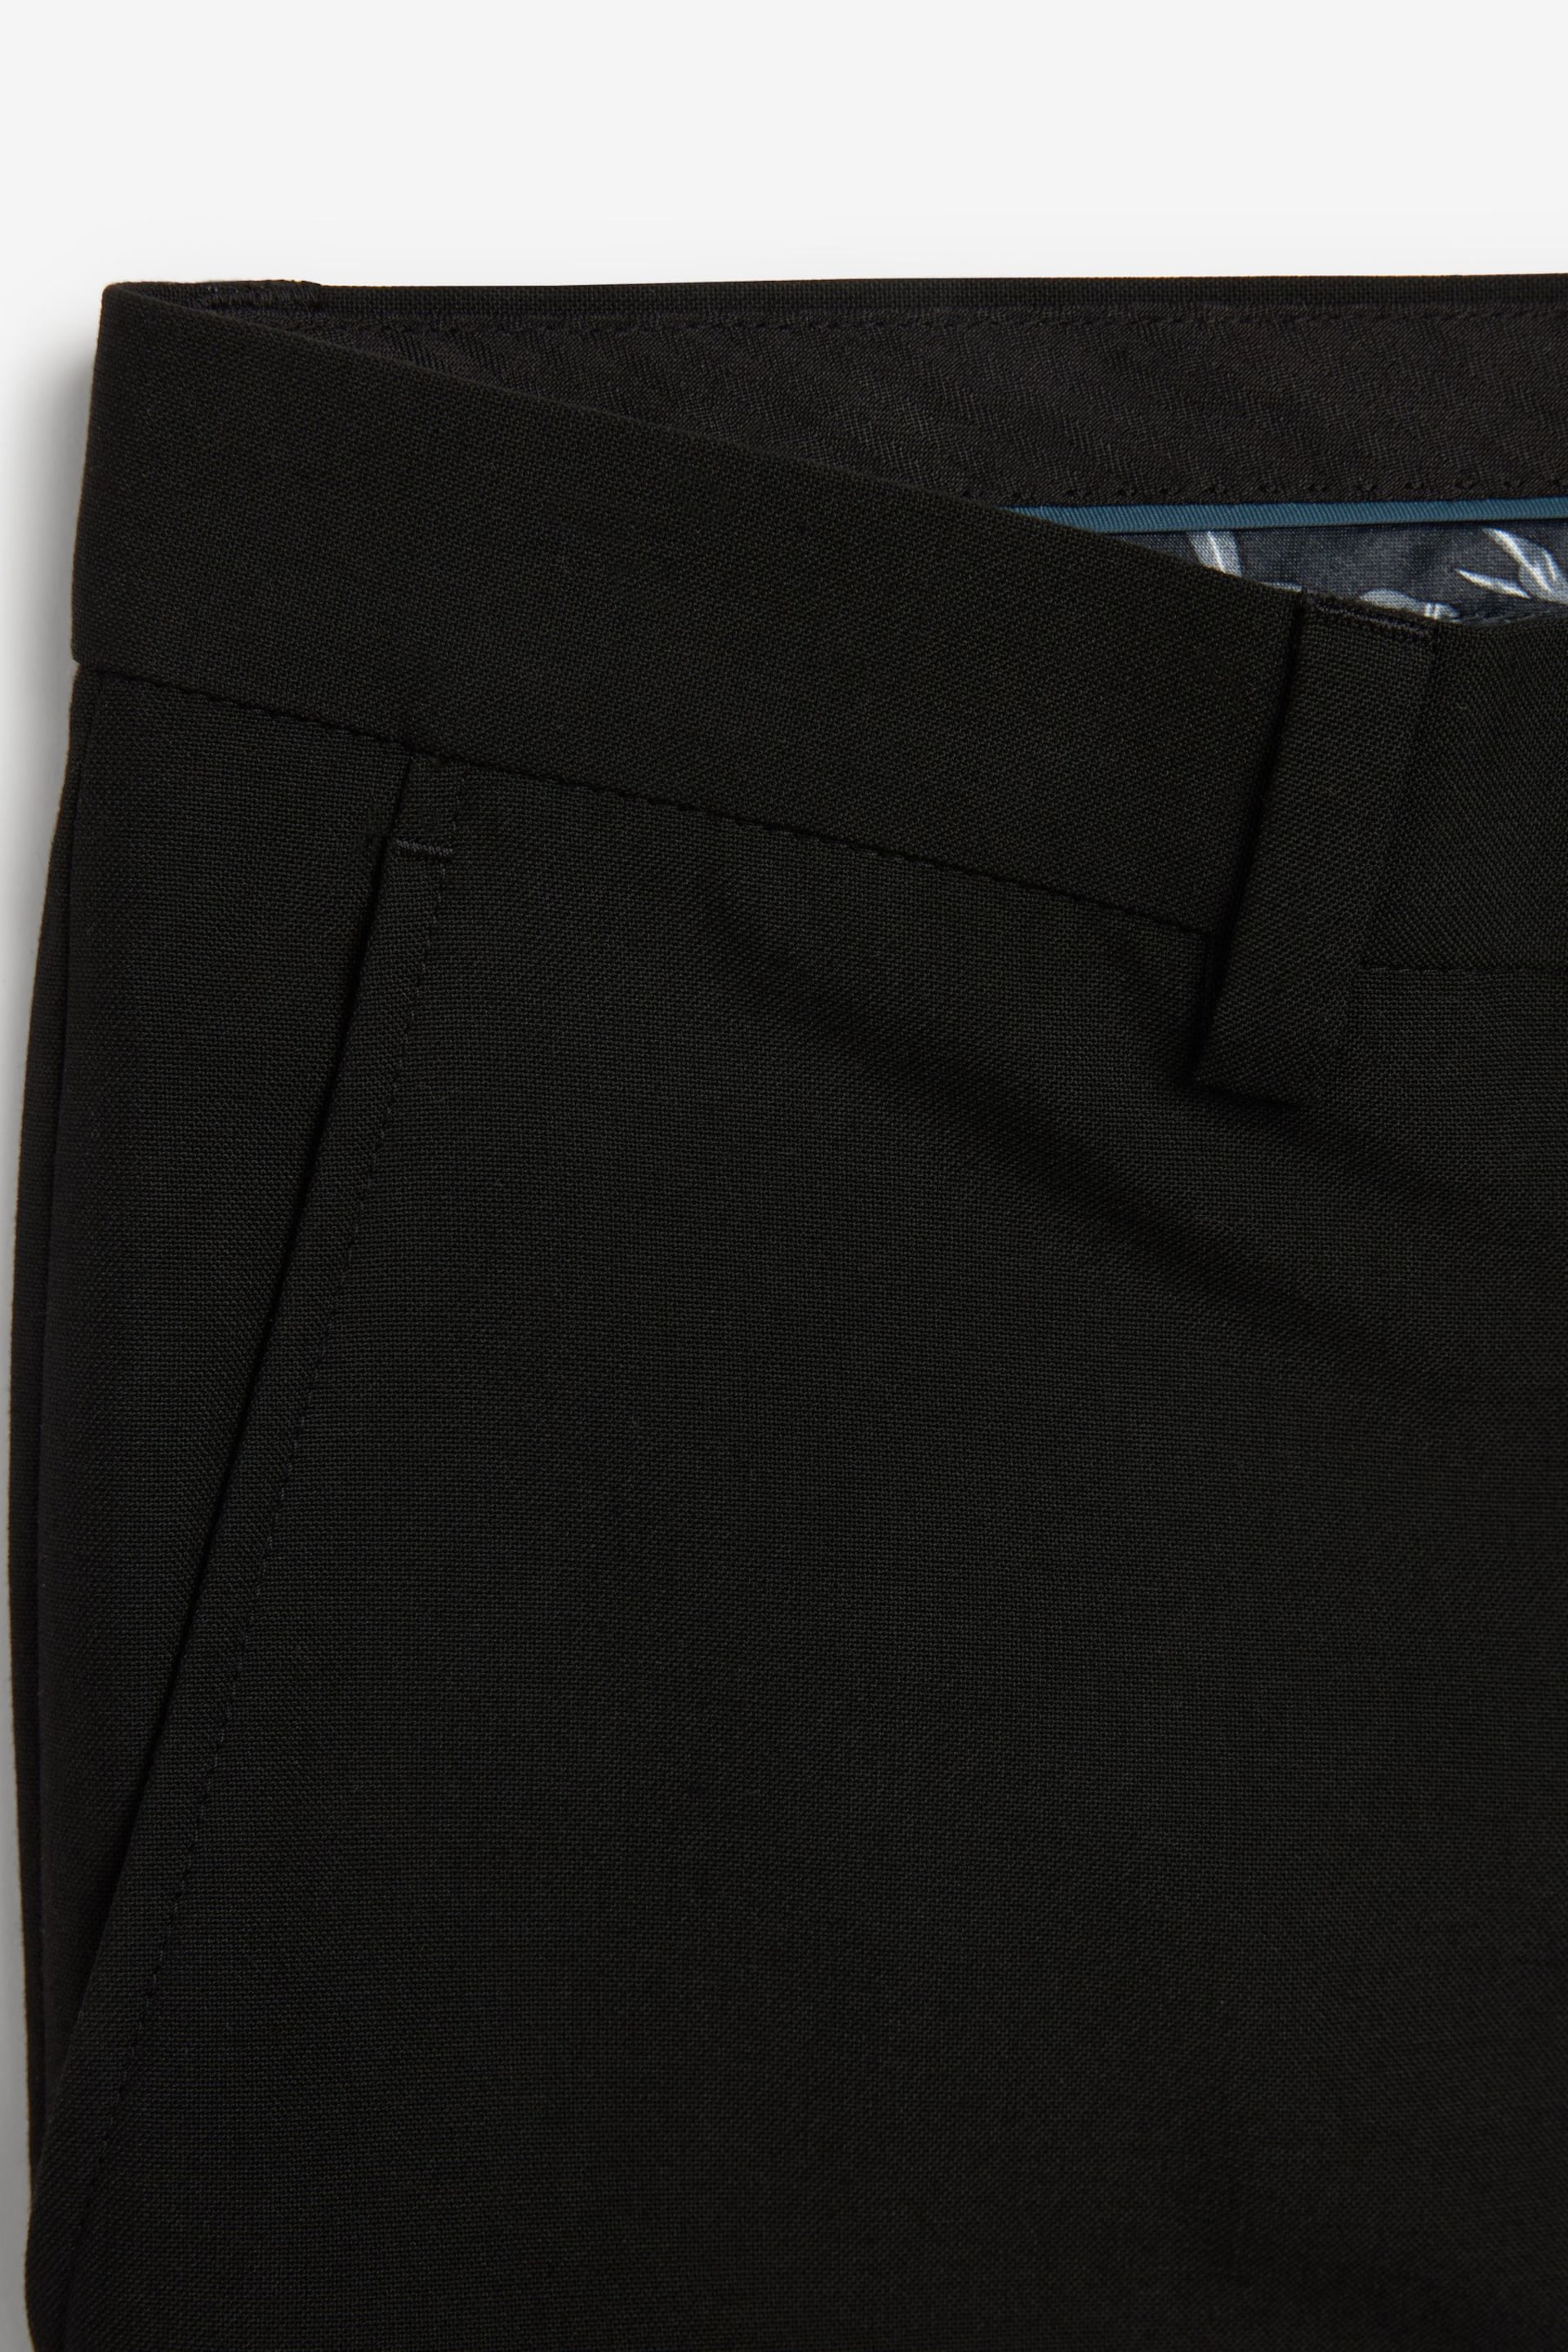 Black Skinny Suit Trousers - Image 7 of 8